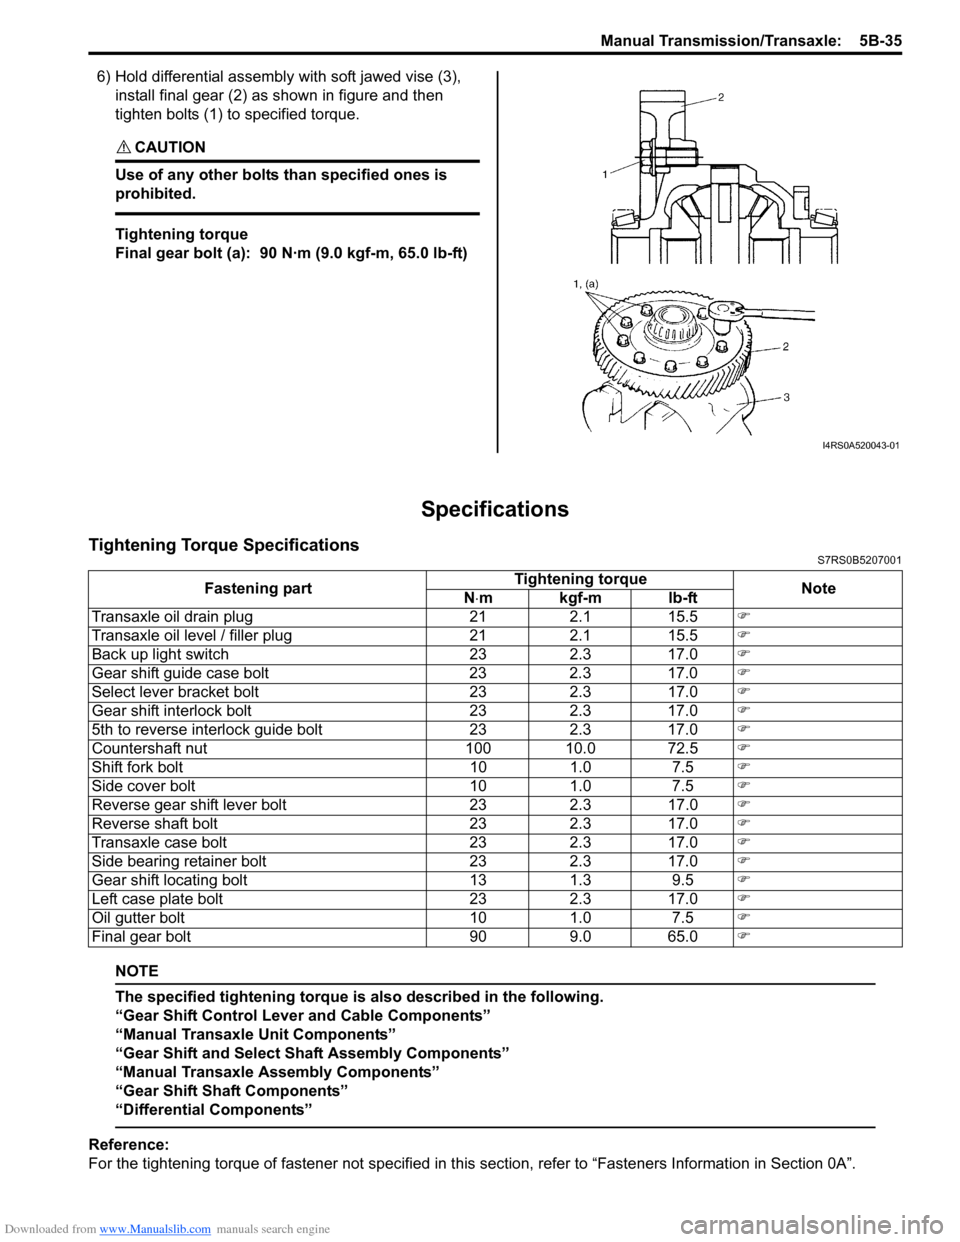 SUZUKI SWIFT 2005 2.G Service Workshop Manual Downloaded from www.Manualslib.com manuals search engine Manual Transmission/Transaxle:  5B-35
6) Hold differential assembly with soft jawed vise (3), 
install final gear (2) as shown in figure and th